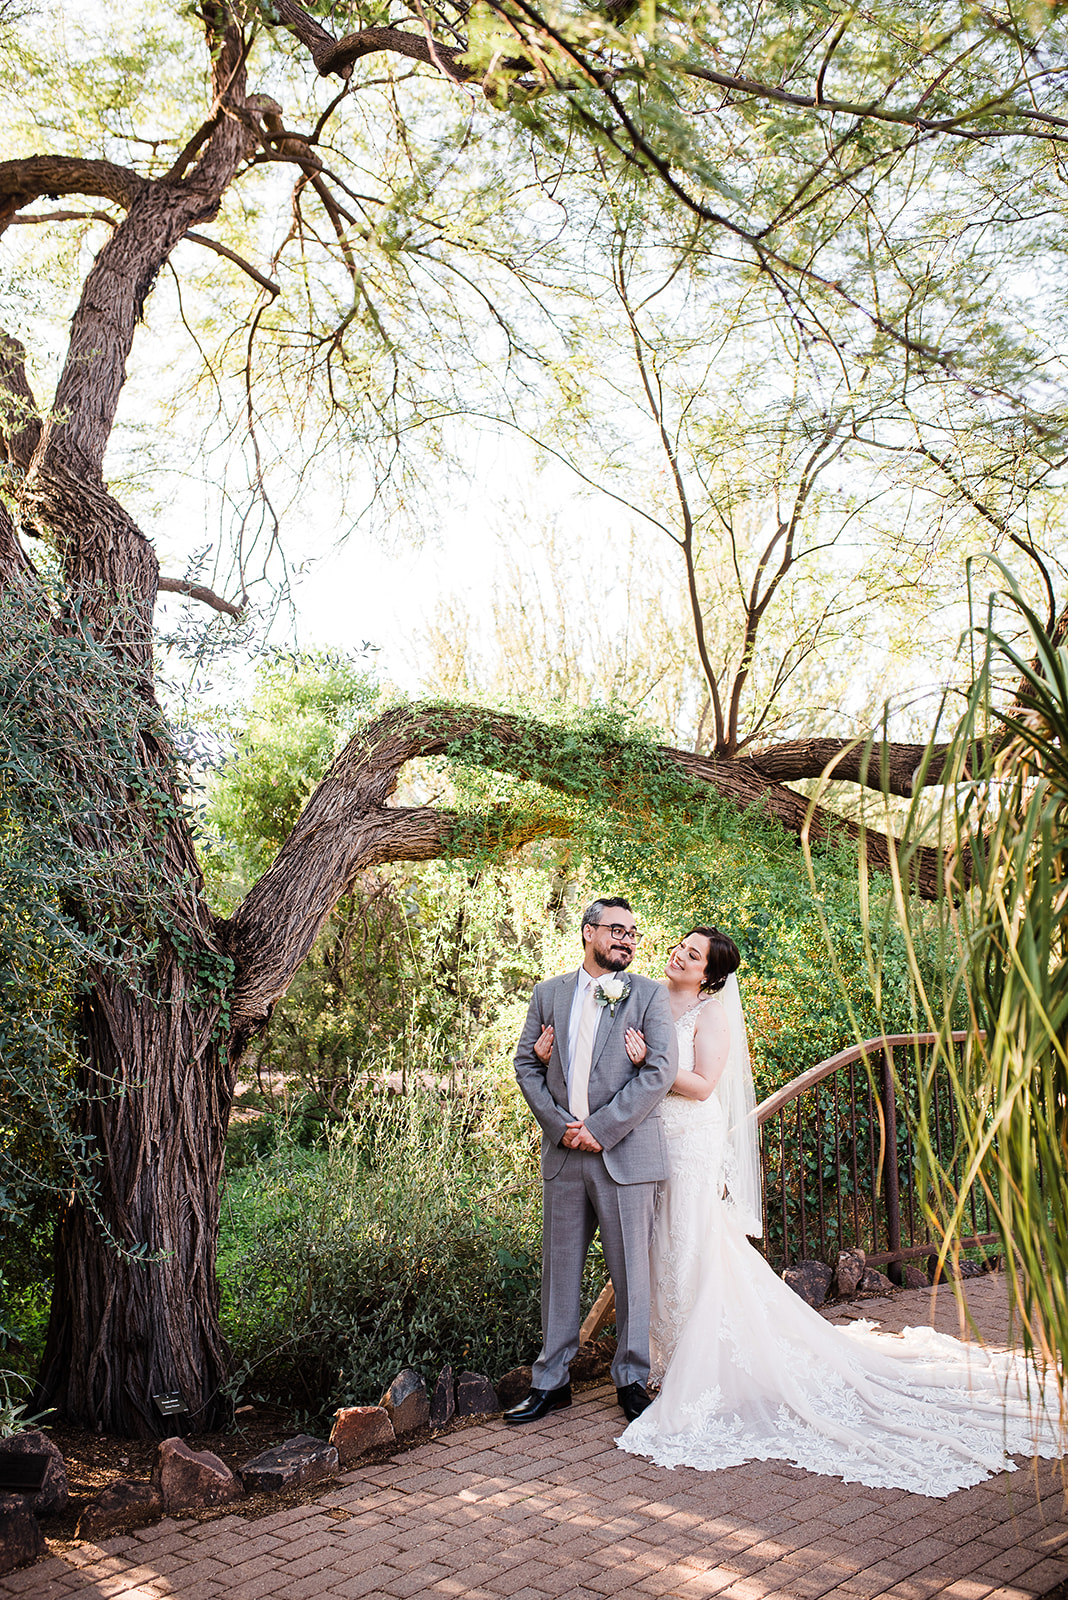 A bride hangs onto the back of her groom in a grey suit under a large old tree in a Phoenix Country Club Weddings garden at sunset